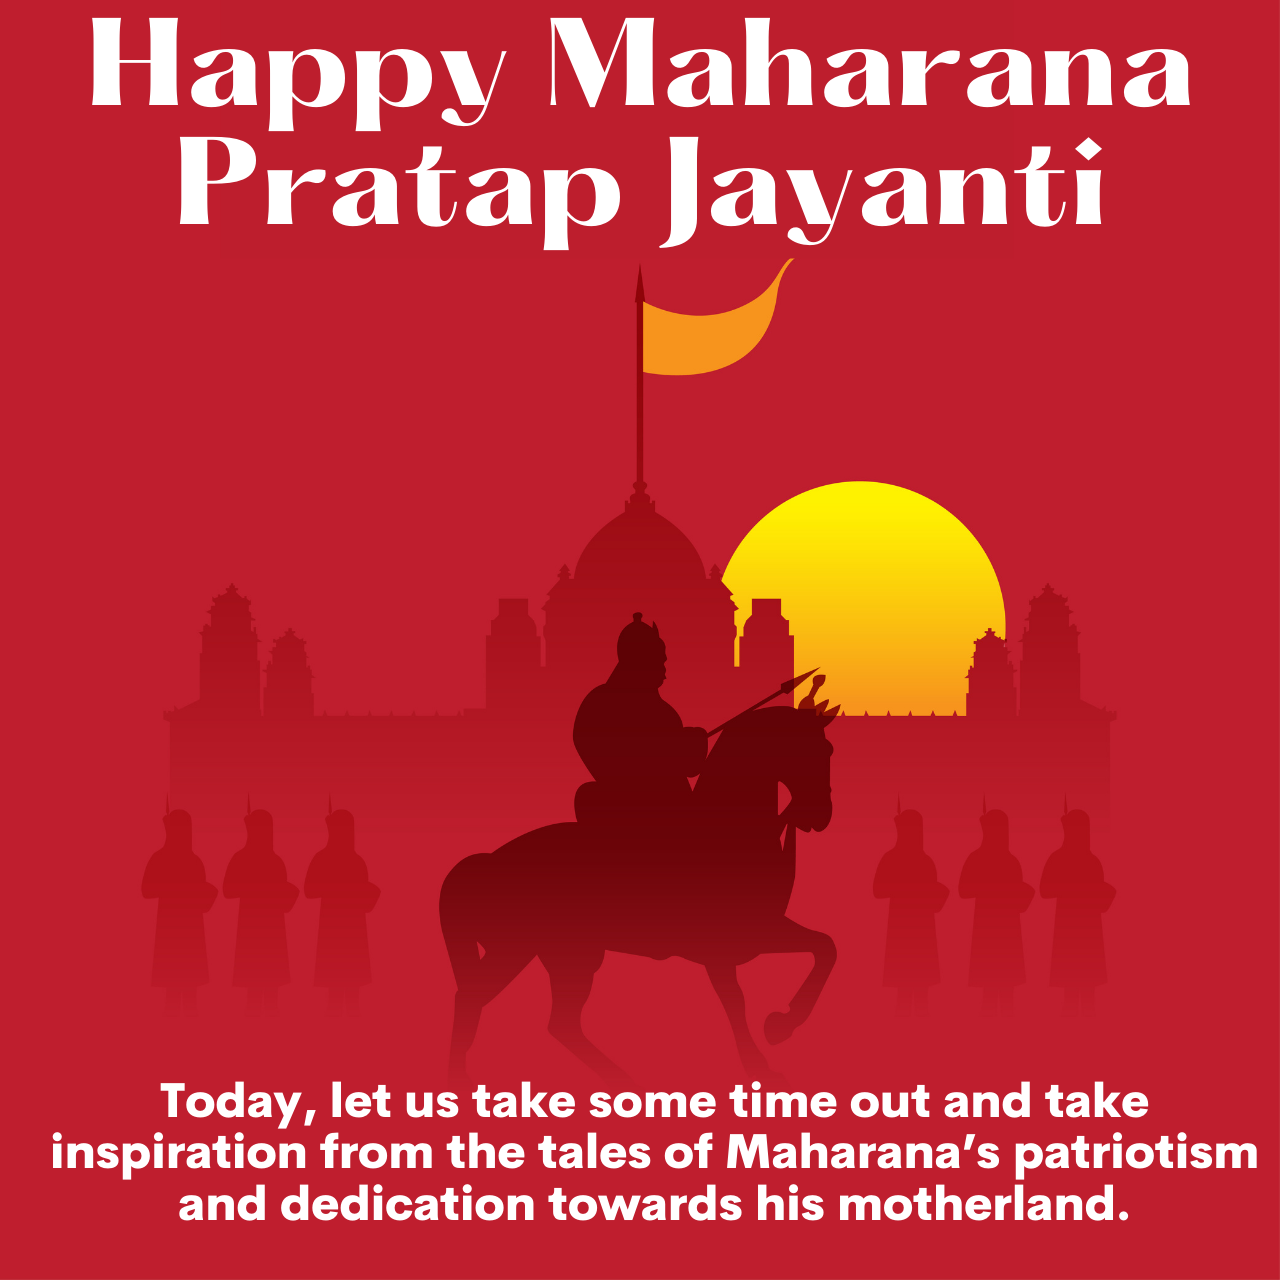 Maharana Pratap Jayanti 2021 Wishes, Photo (Images), Poster, Greetings, Quotes, Status, and Messages to Share